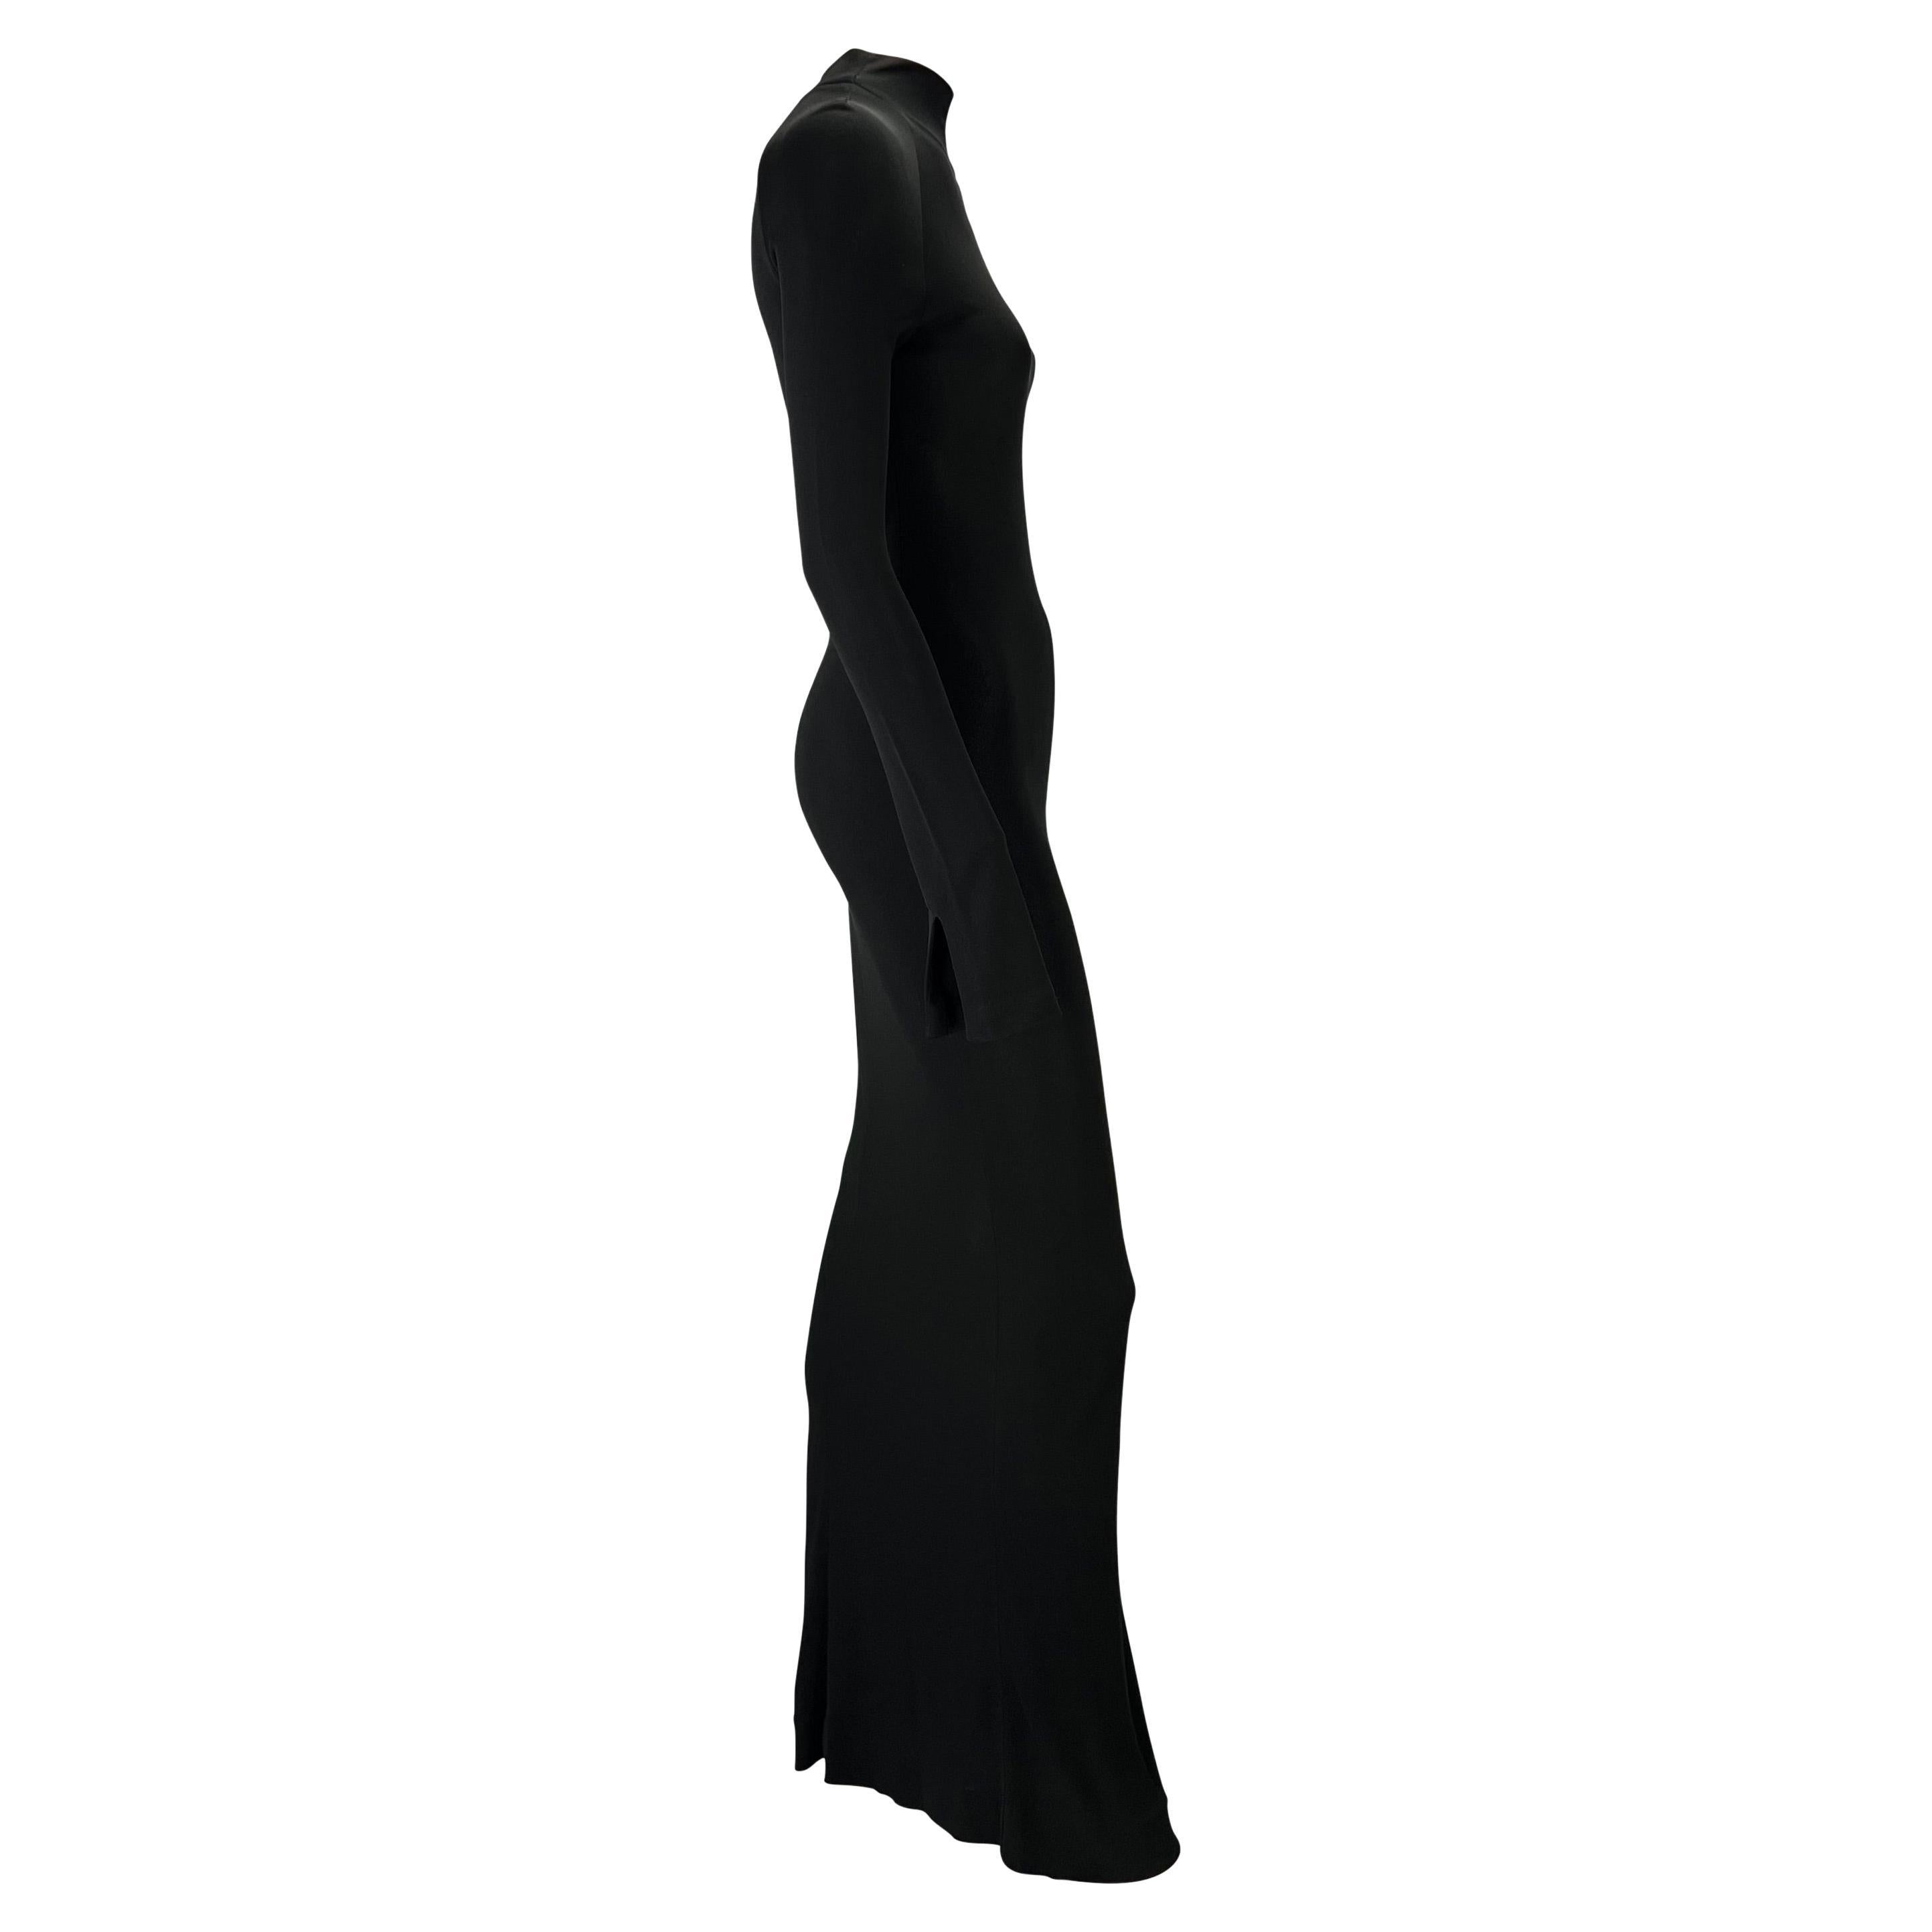 S/S 1998 Gucci by Tom Ford Black Stretch Viscose Long Sleeve Gown For Sale 5